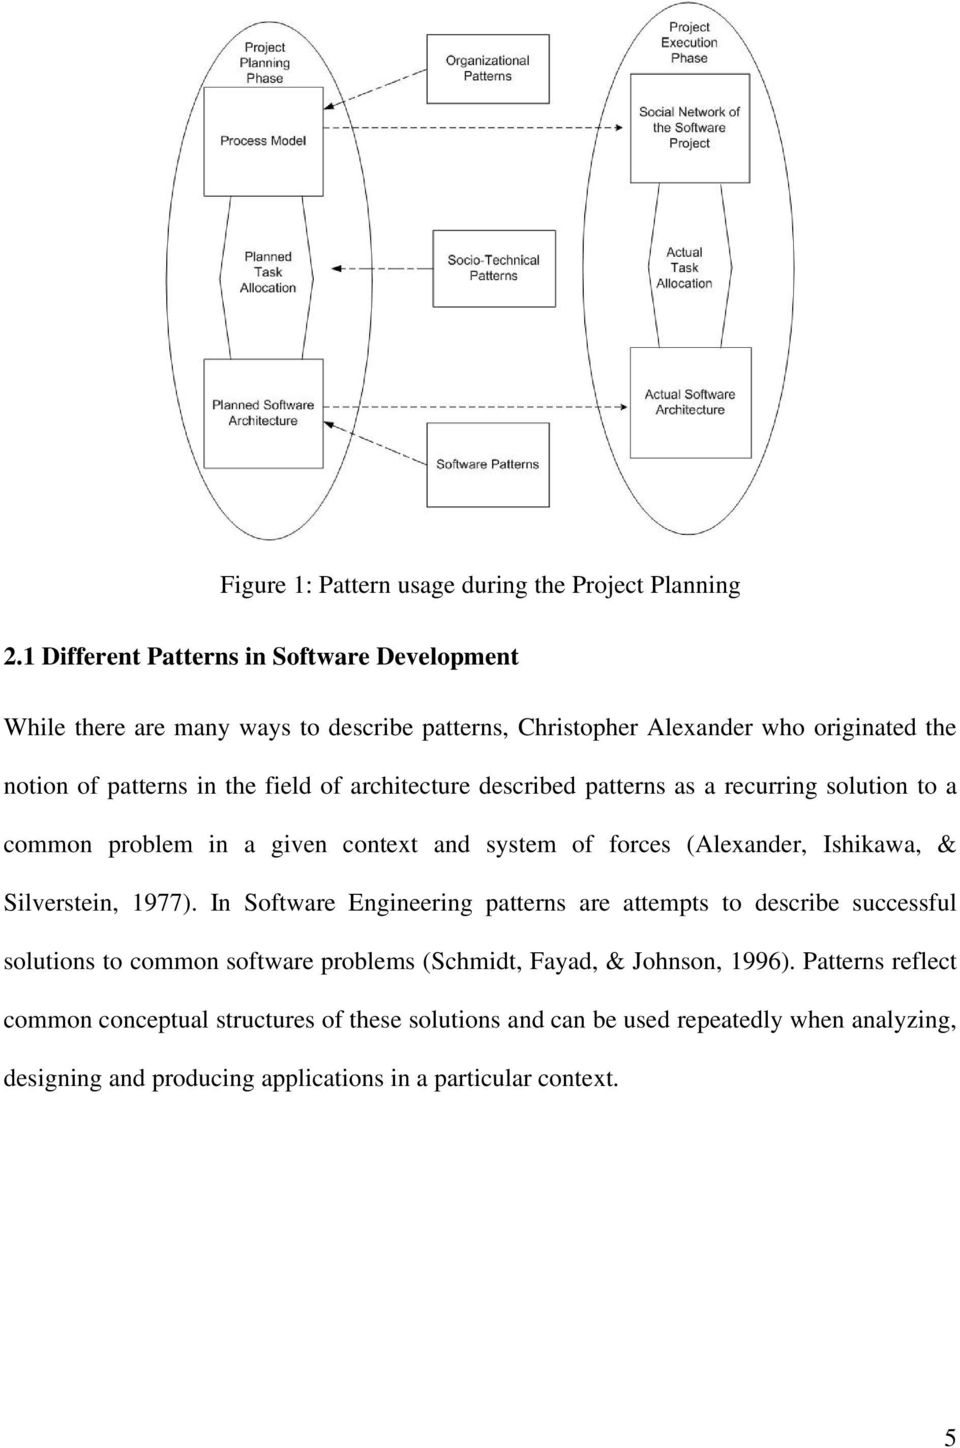 architecture described patterns as a recurring solution to a common problem in a given context and system of forces (Alexander, Ishikawa, & Silverstein, 1977).